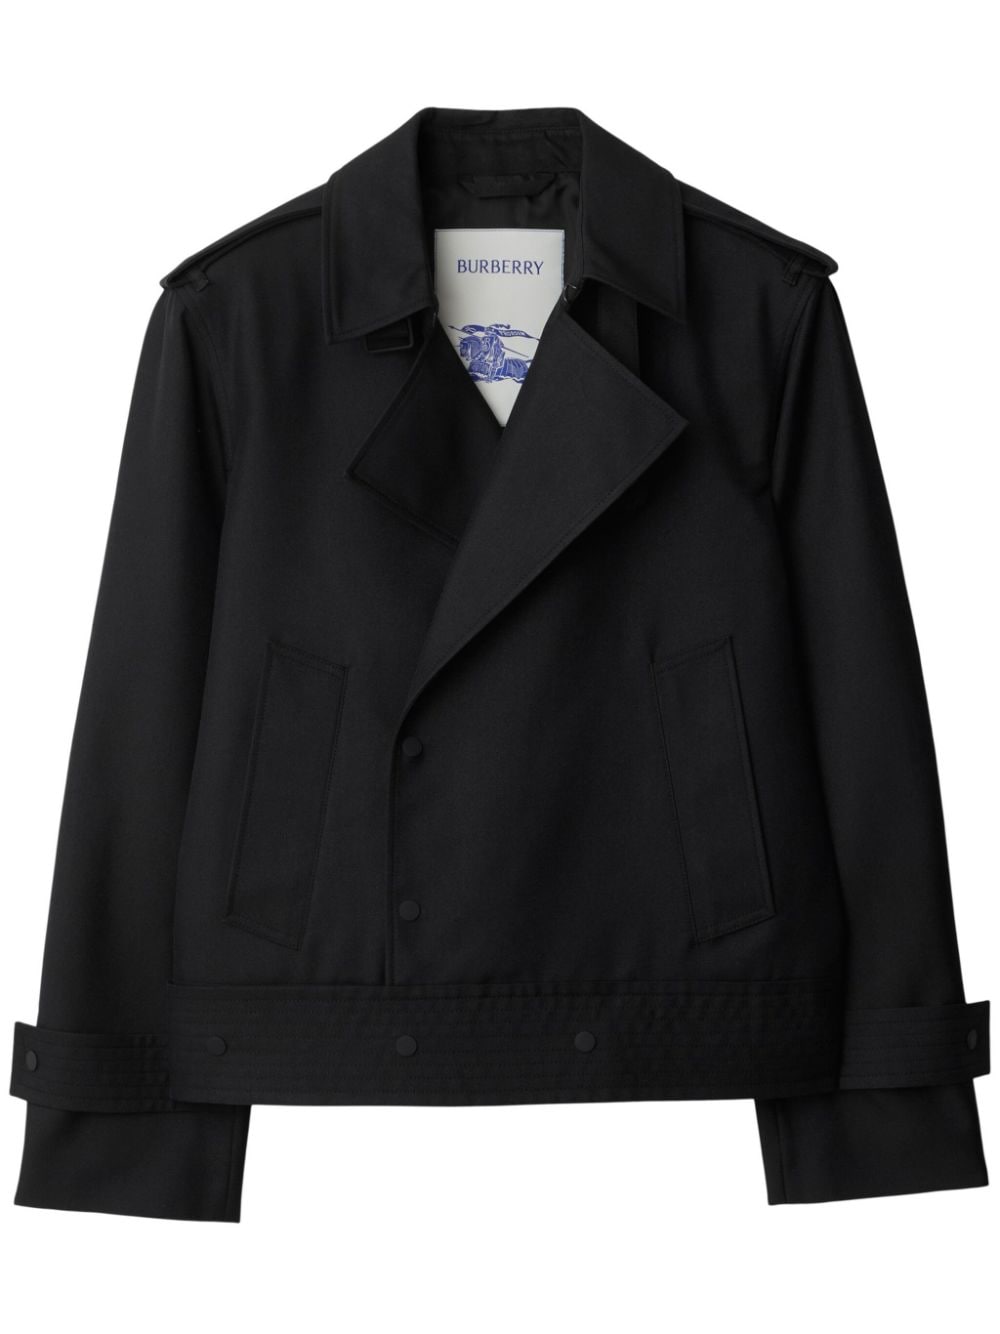 Burberry double-breasted trench-style jacket - Black